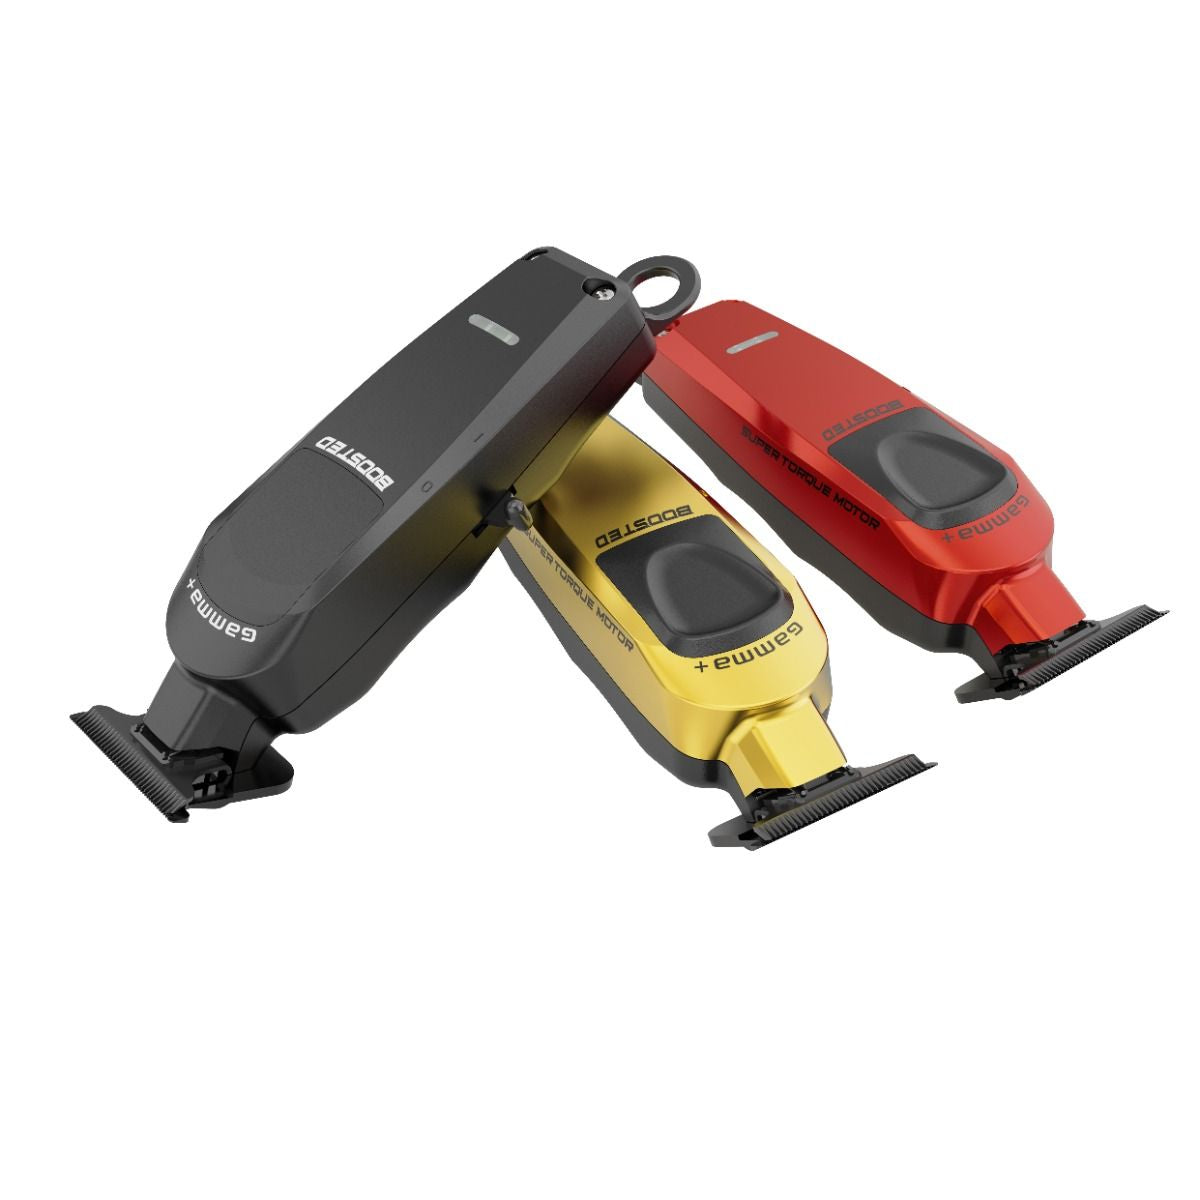 Gamma Boosted Trimmer - Professional Hair Trimmer with Super Torque Motor